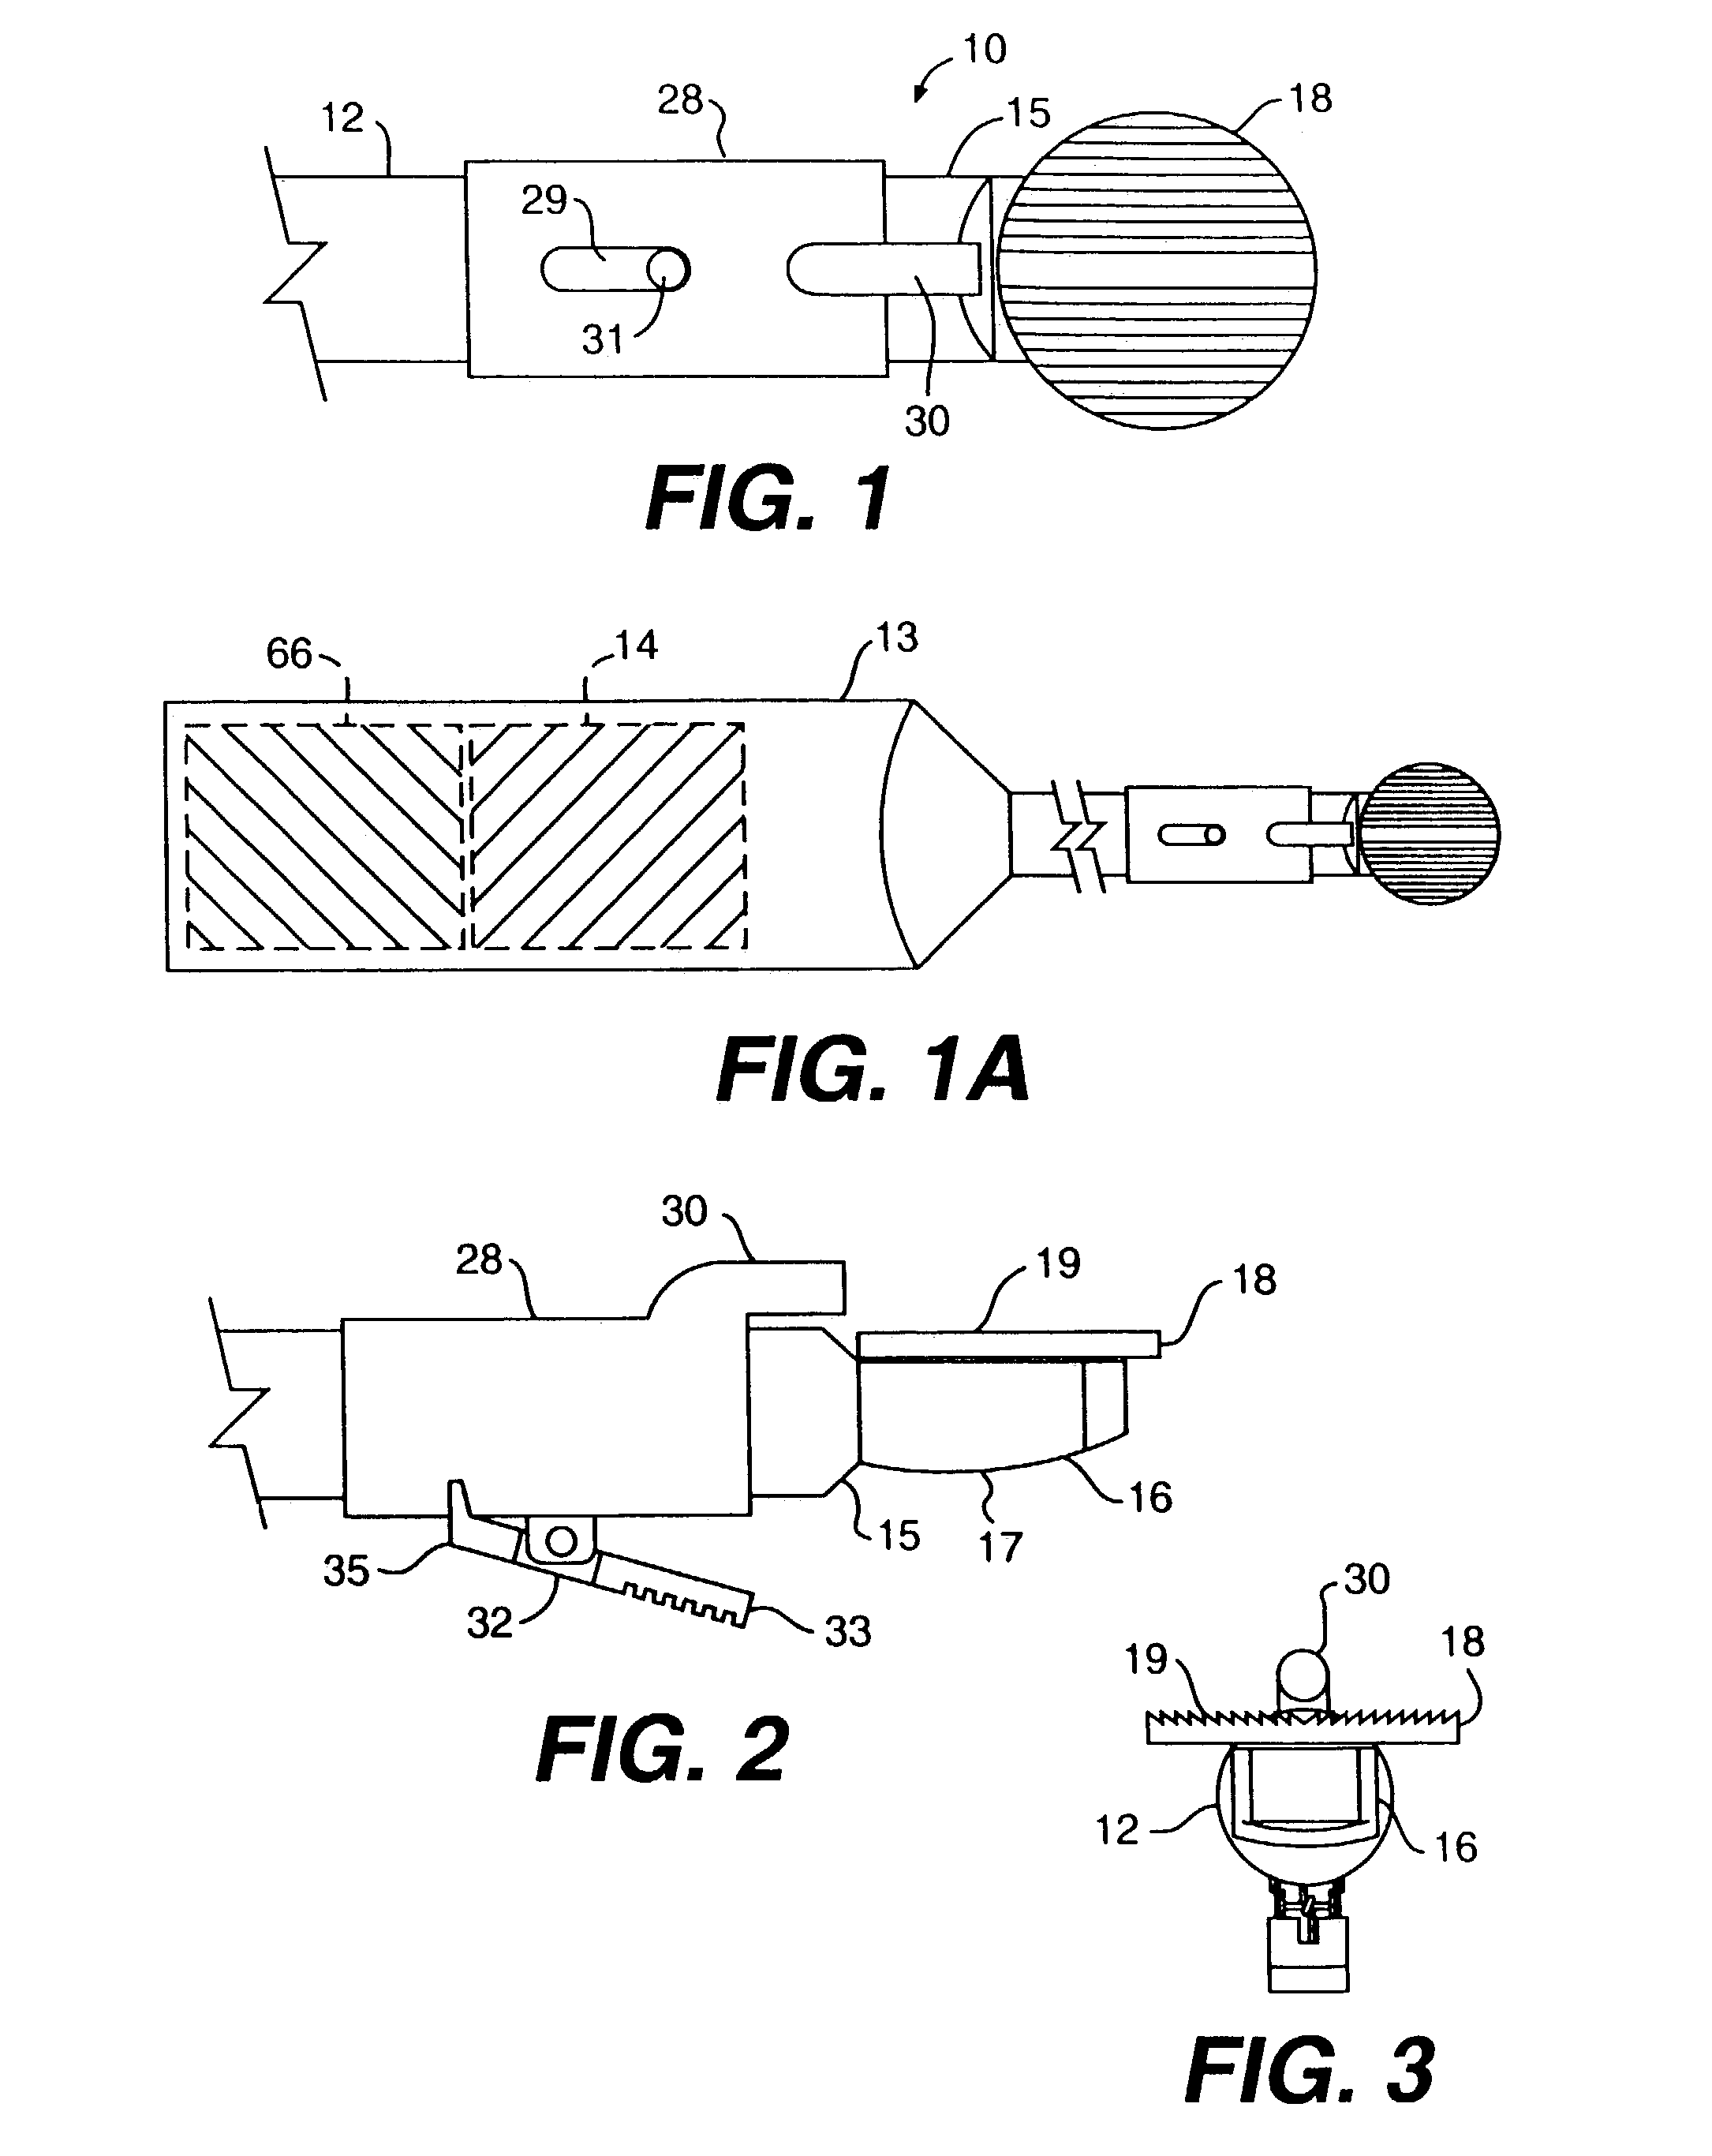 Device and method for preparing a space between adjacent vertebrae to receive an insert